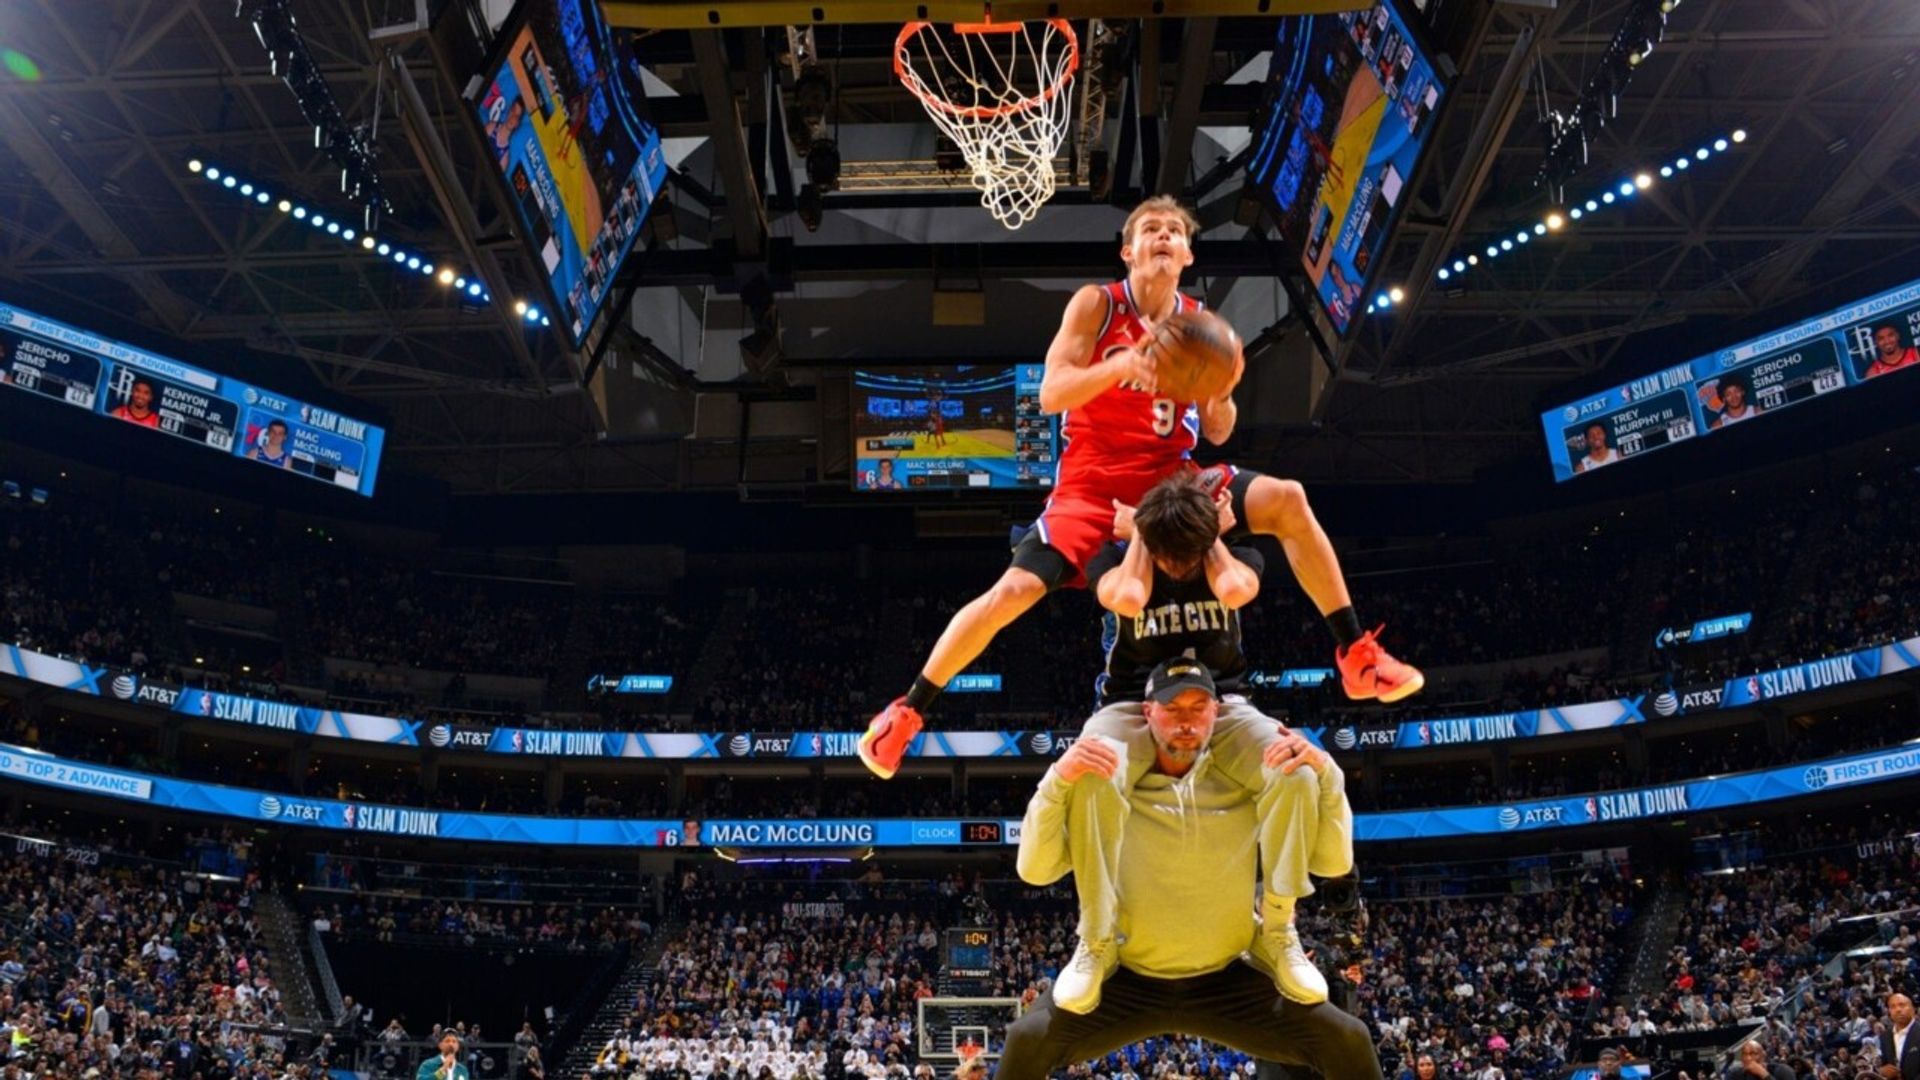 'How in the world does he get so high?!' | McClung wins All-Star slam dunk contest